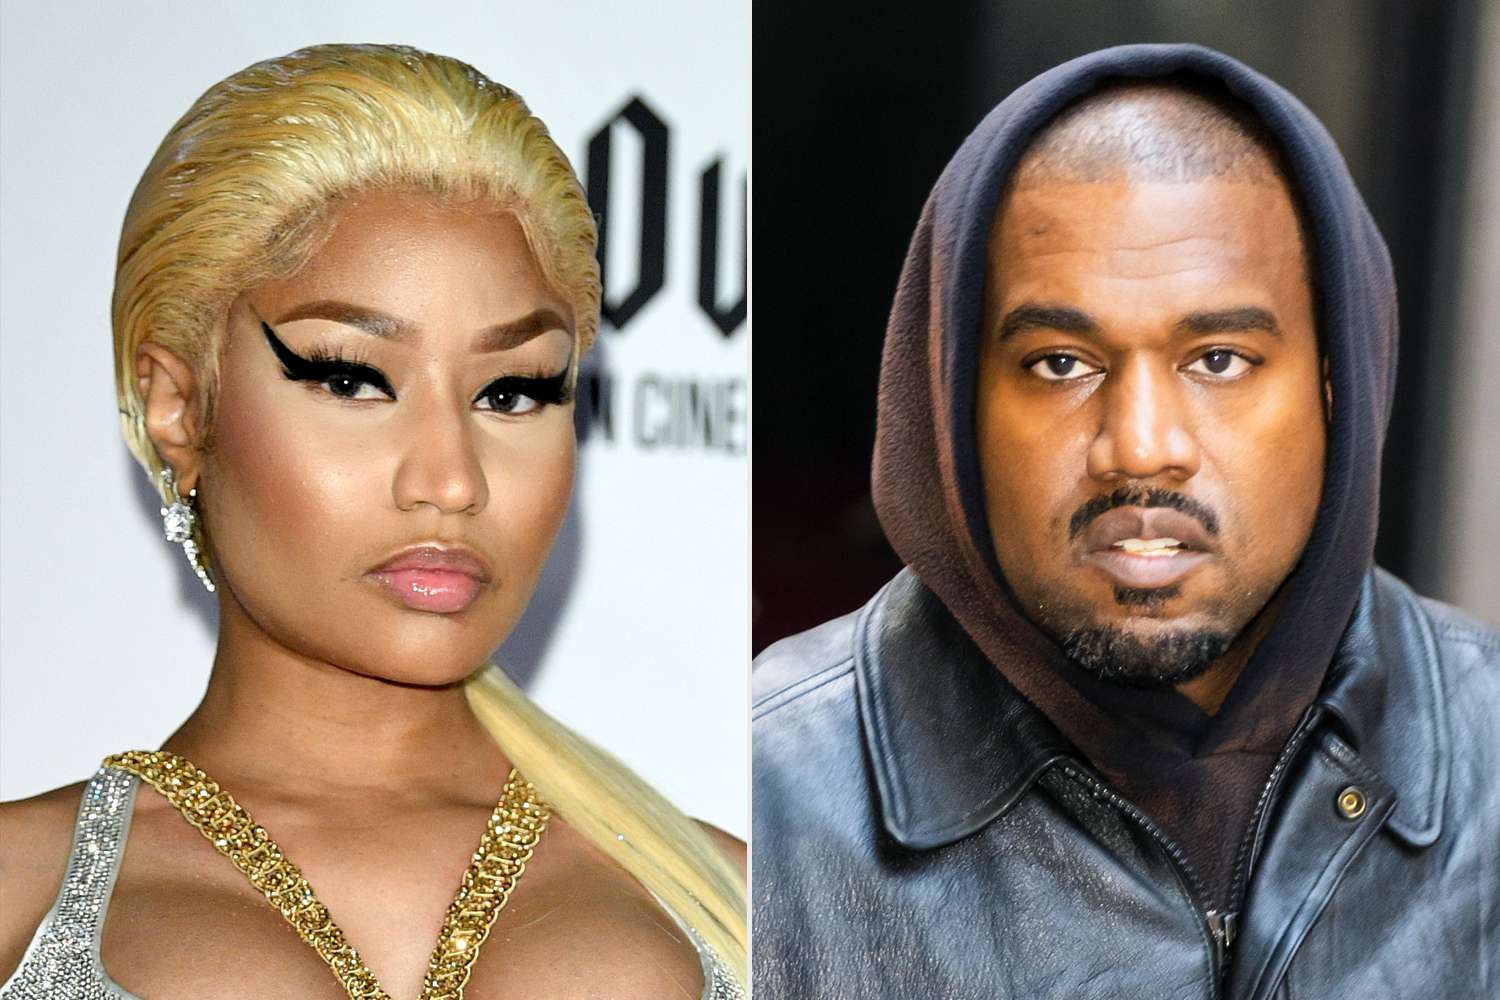 Nicki Minaj Appears to Call Kanye West a 'Clown' After Cutting 'Monster' from Festival Set